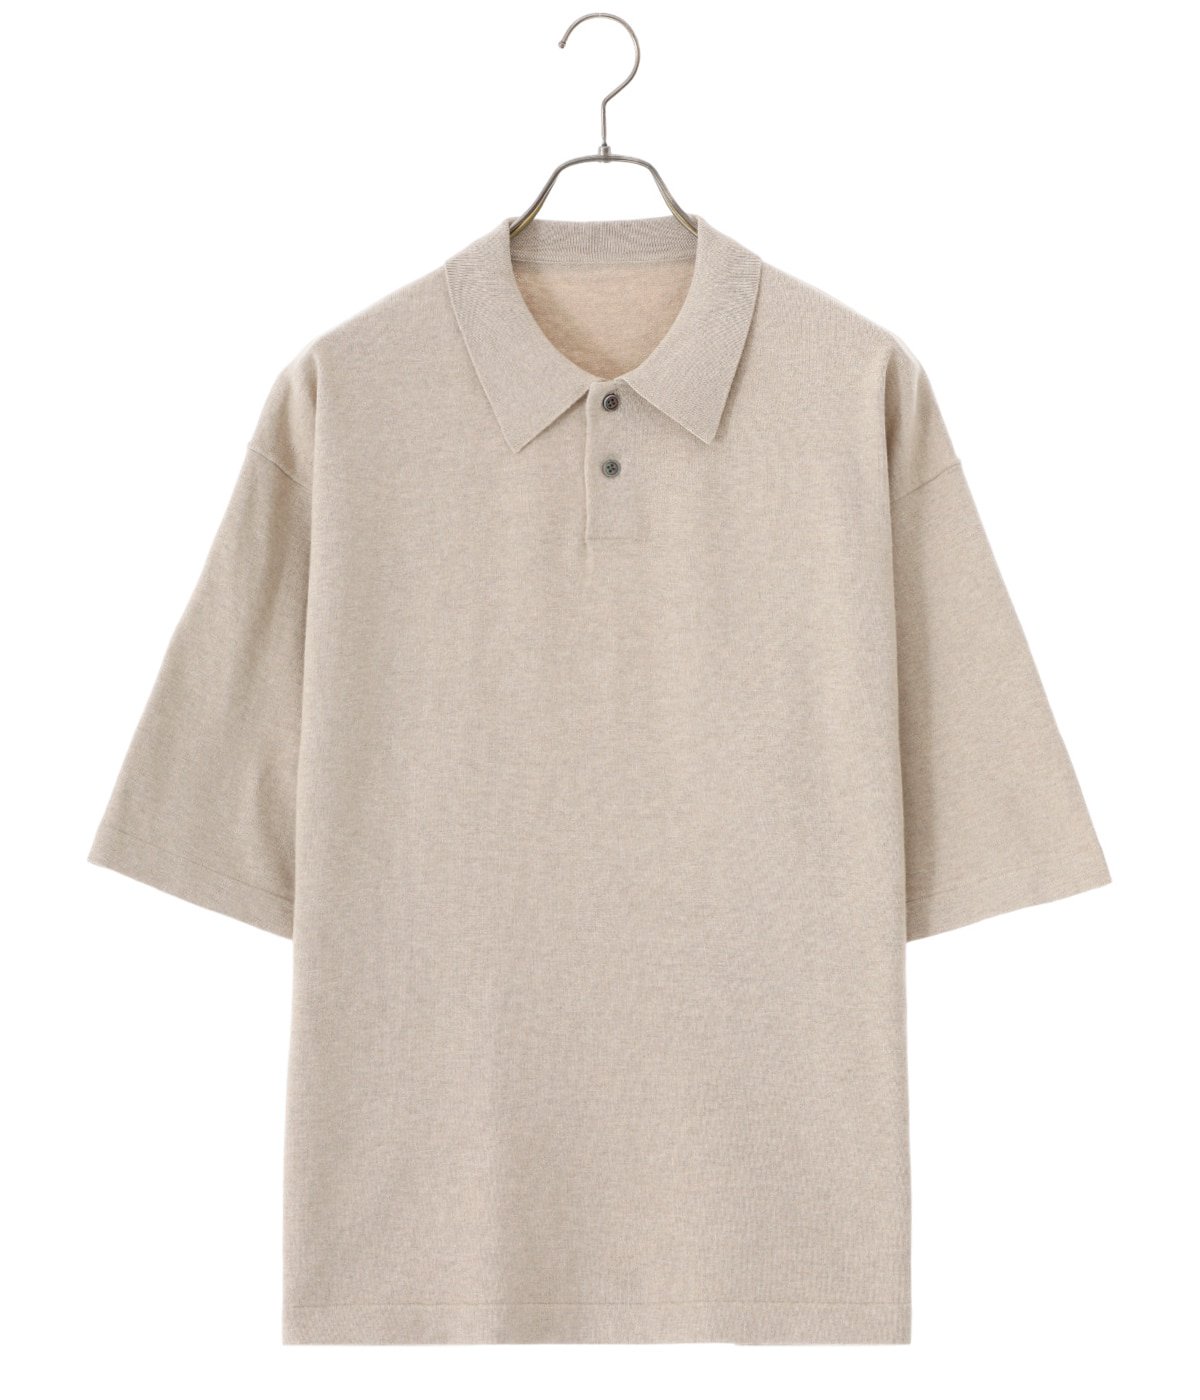 ONLY ARK】別注 Knit Polo S/S | crepuscule(クレプスキュール 